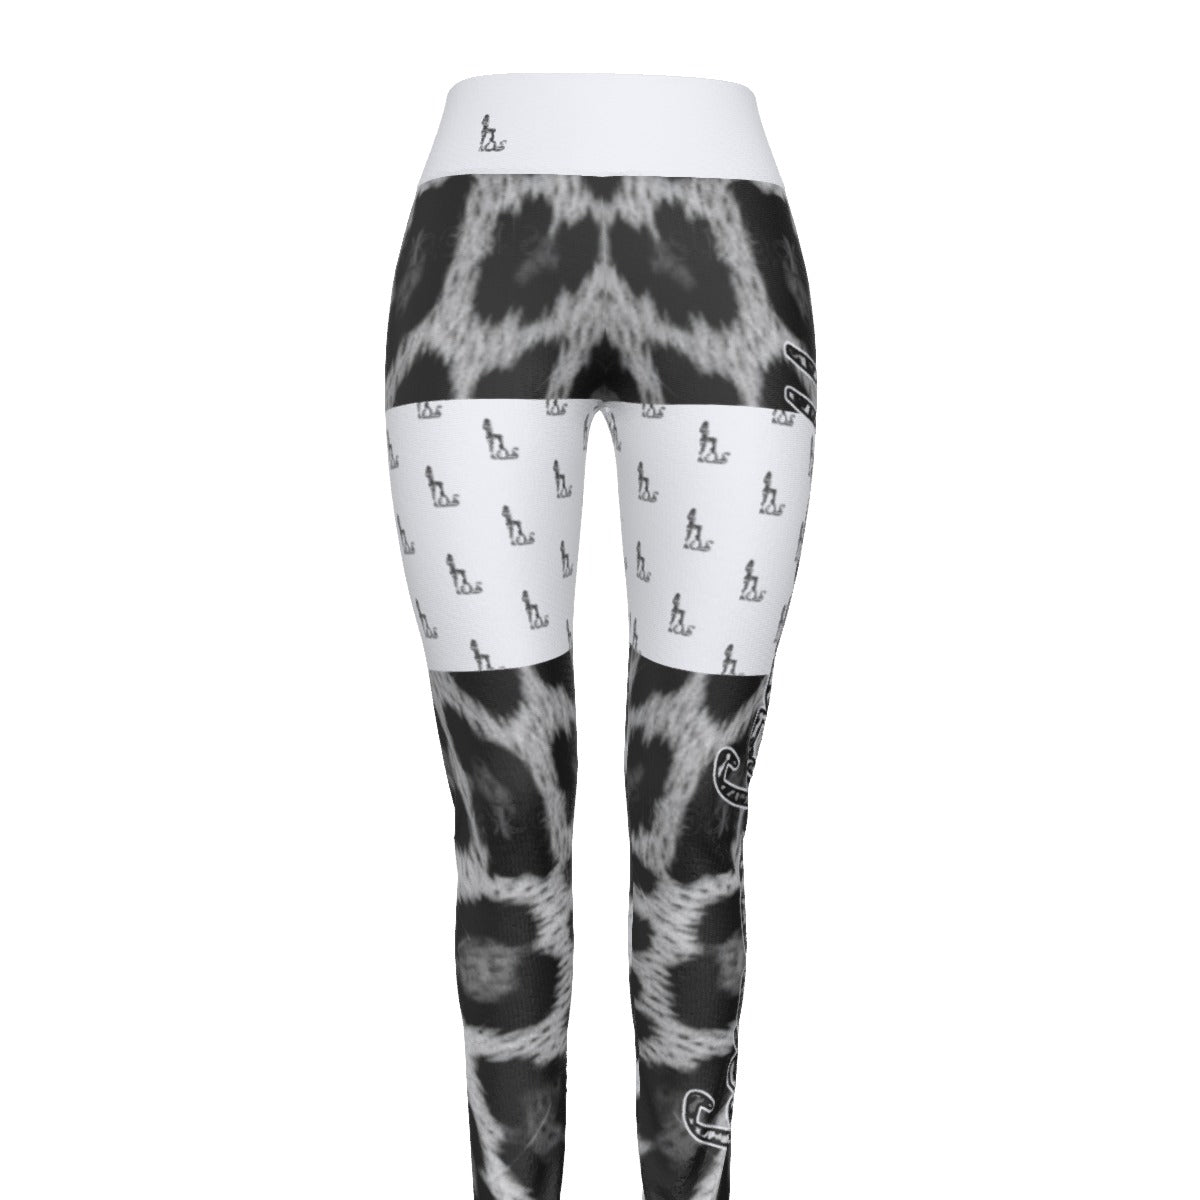 Officially Sexy Snow Leopard Print Collection Women's White High Waist Thigh High Booty Popper Leggings #2 No OS (English) 1